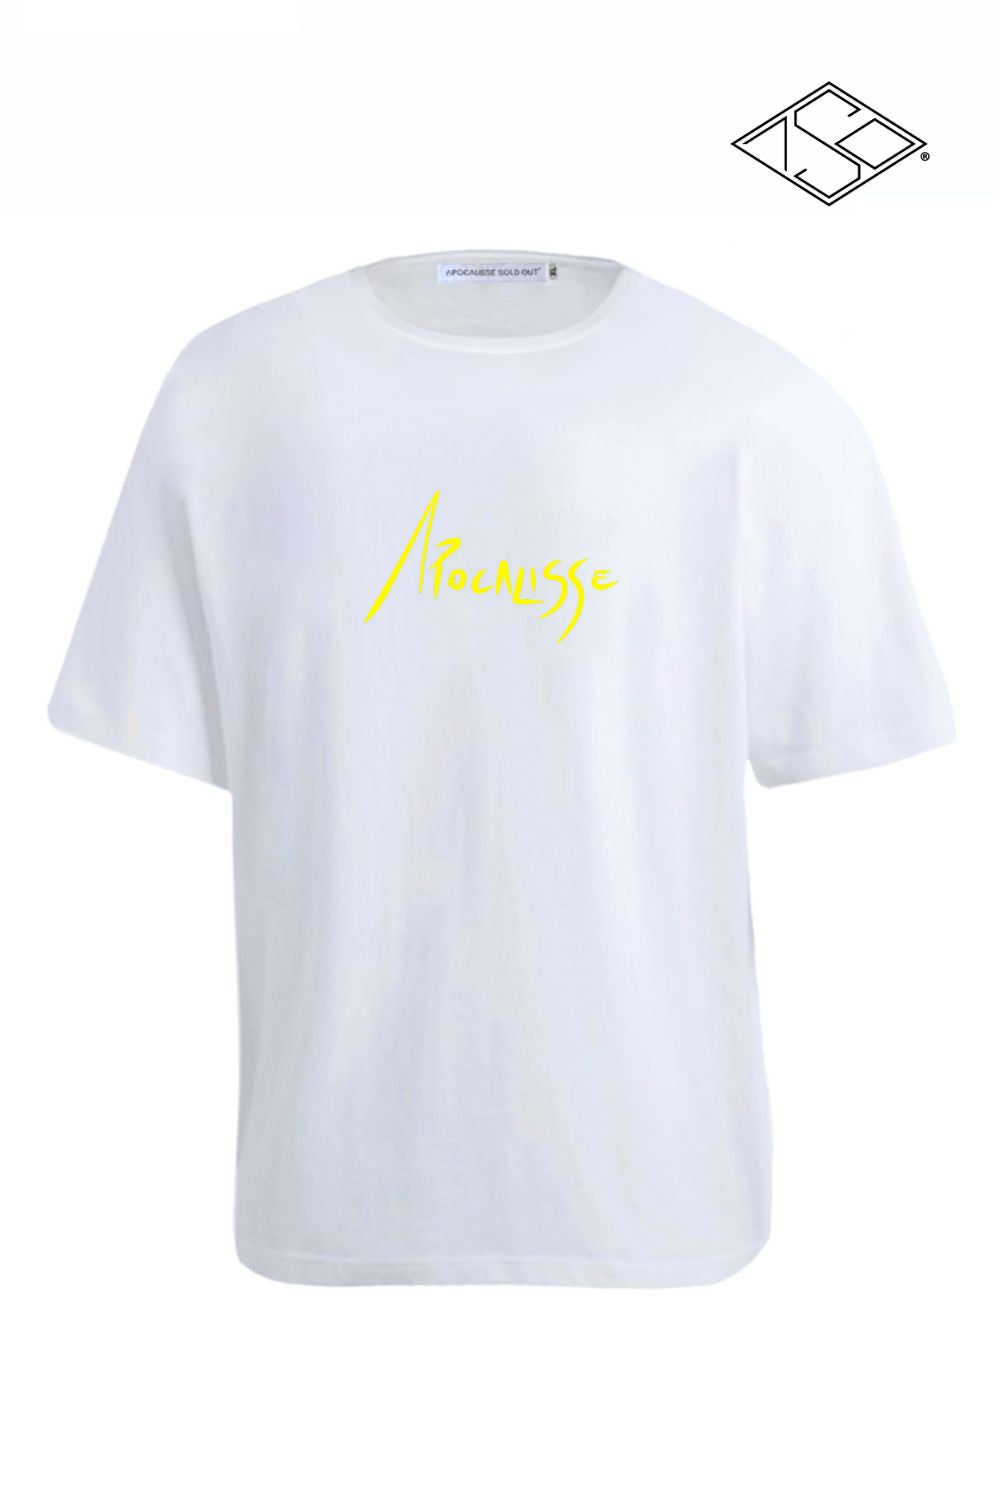 Apocalisse Basic edition yellow print white tshirt by ApocalisseSoldOut® Fashion Brand